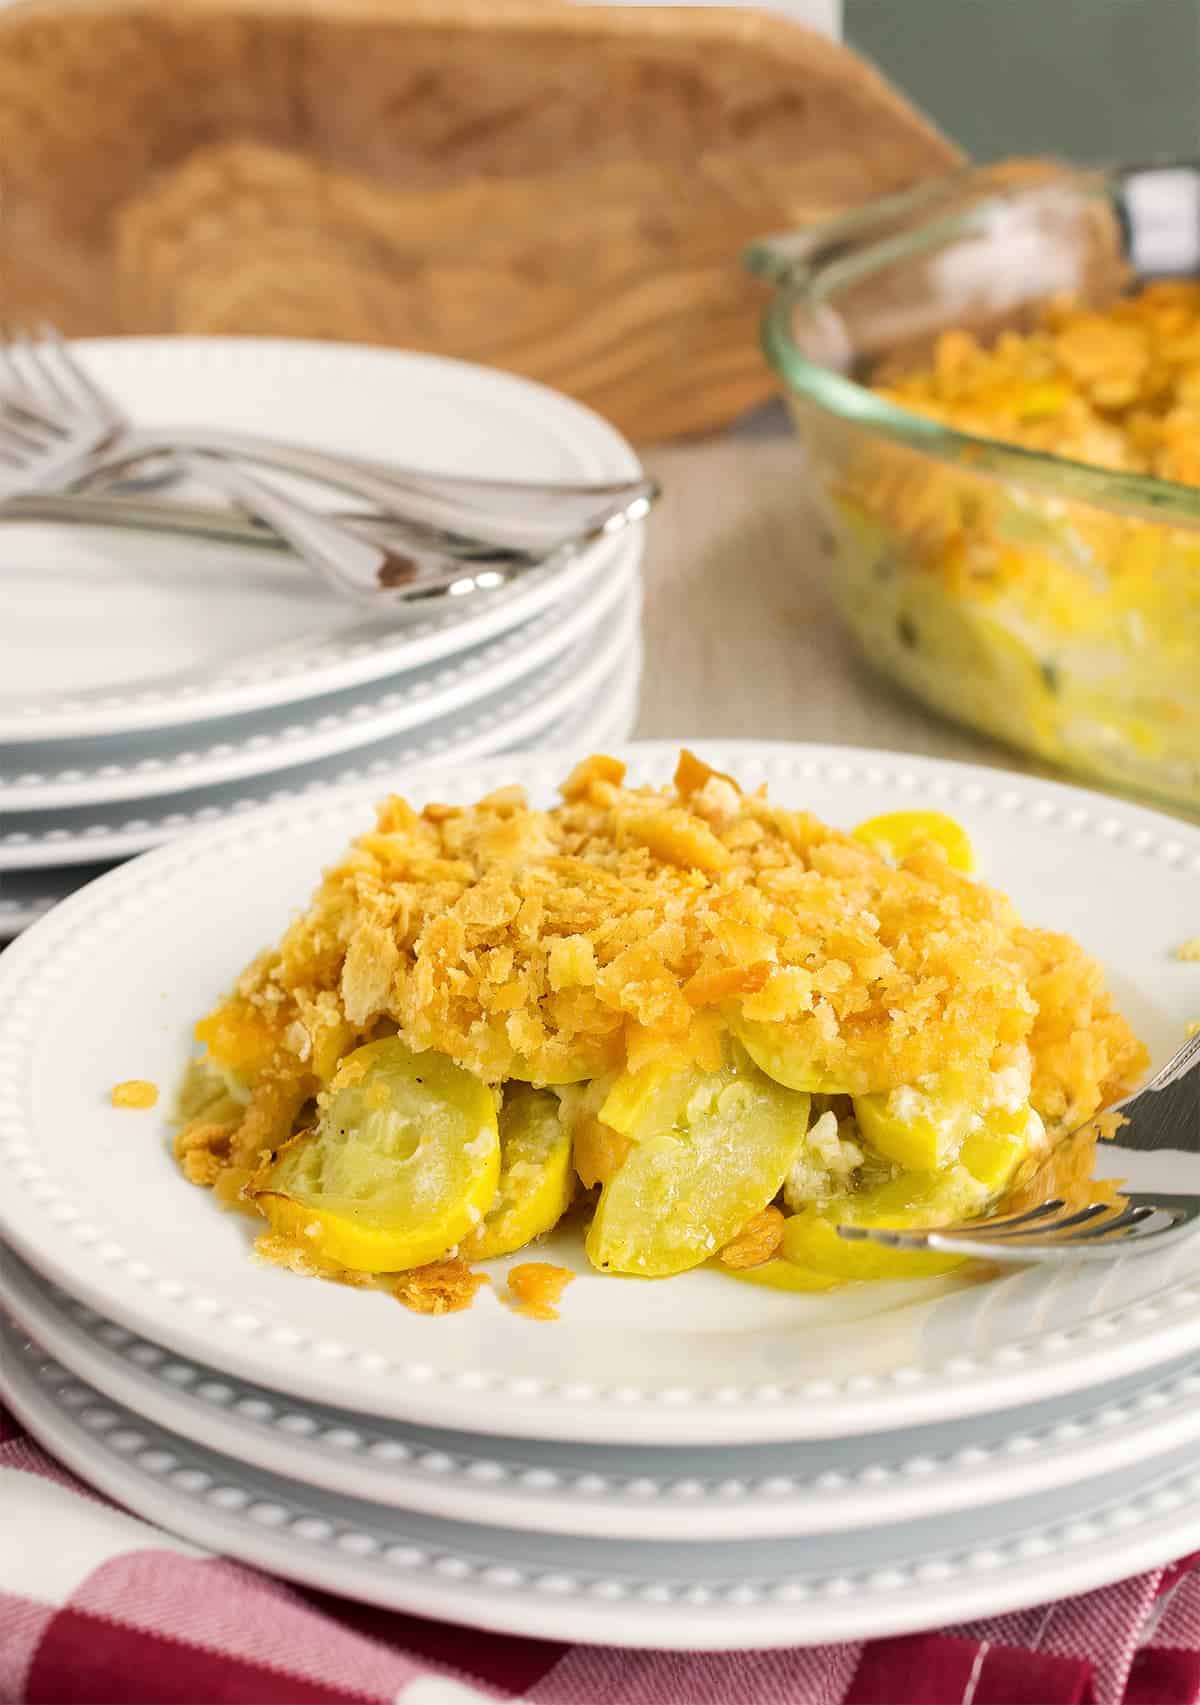 Squash casserole with ritz cracker toping as a side dish served on a stack of plates.